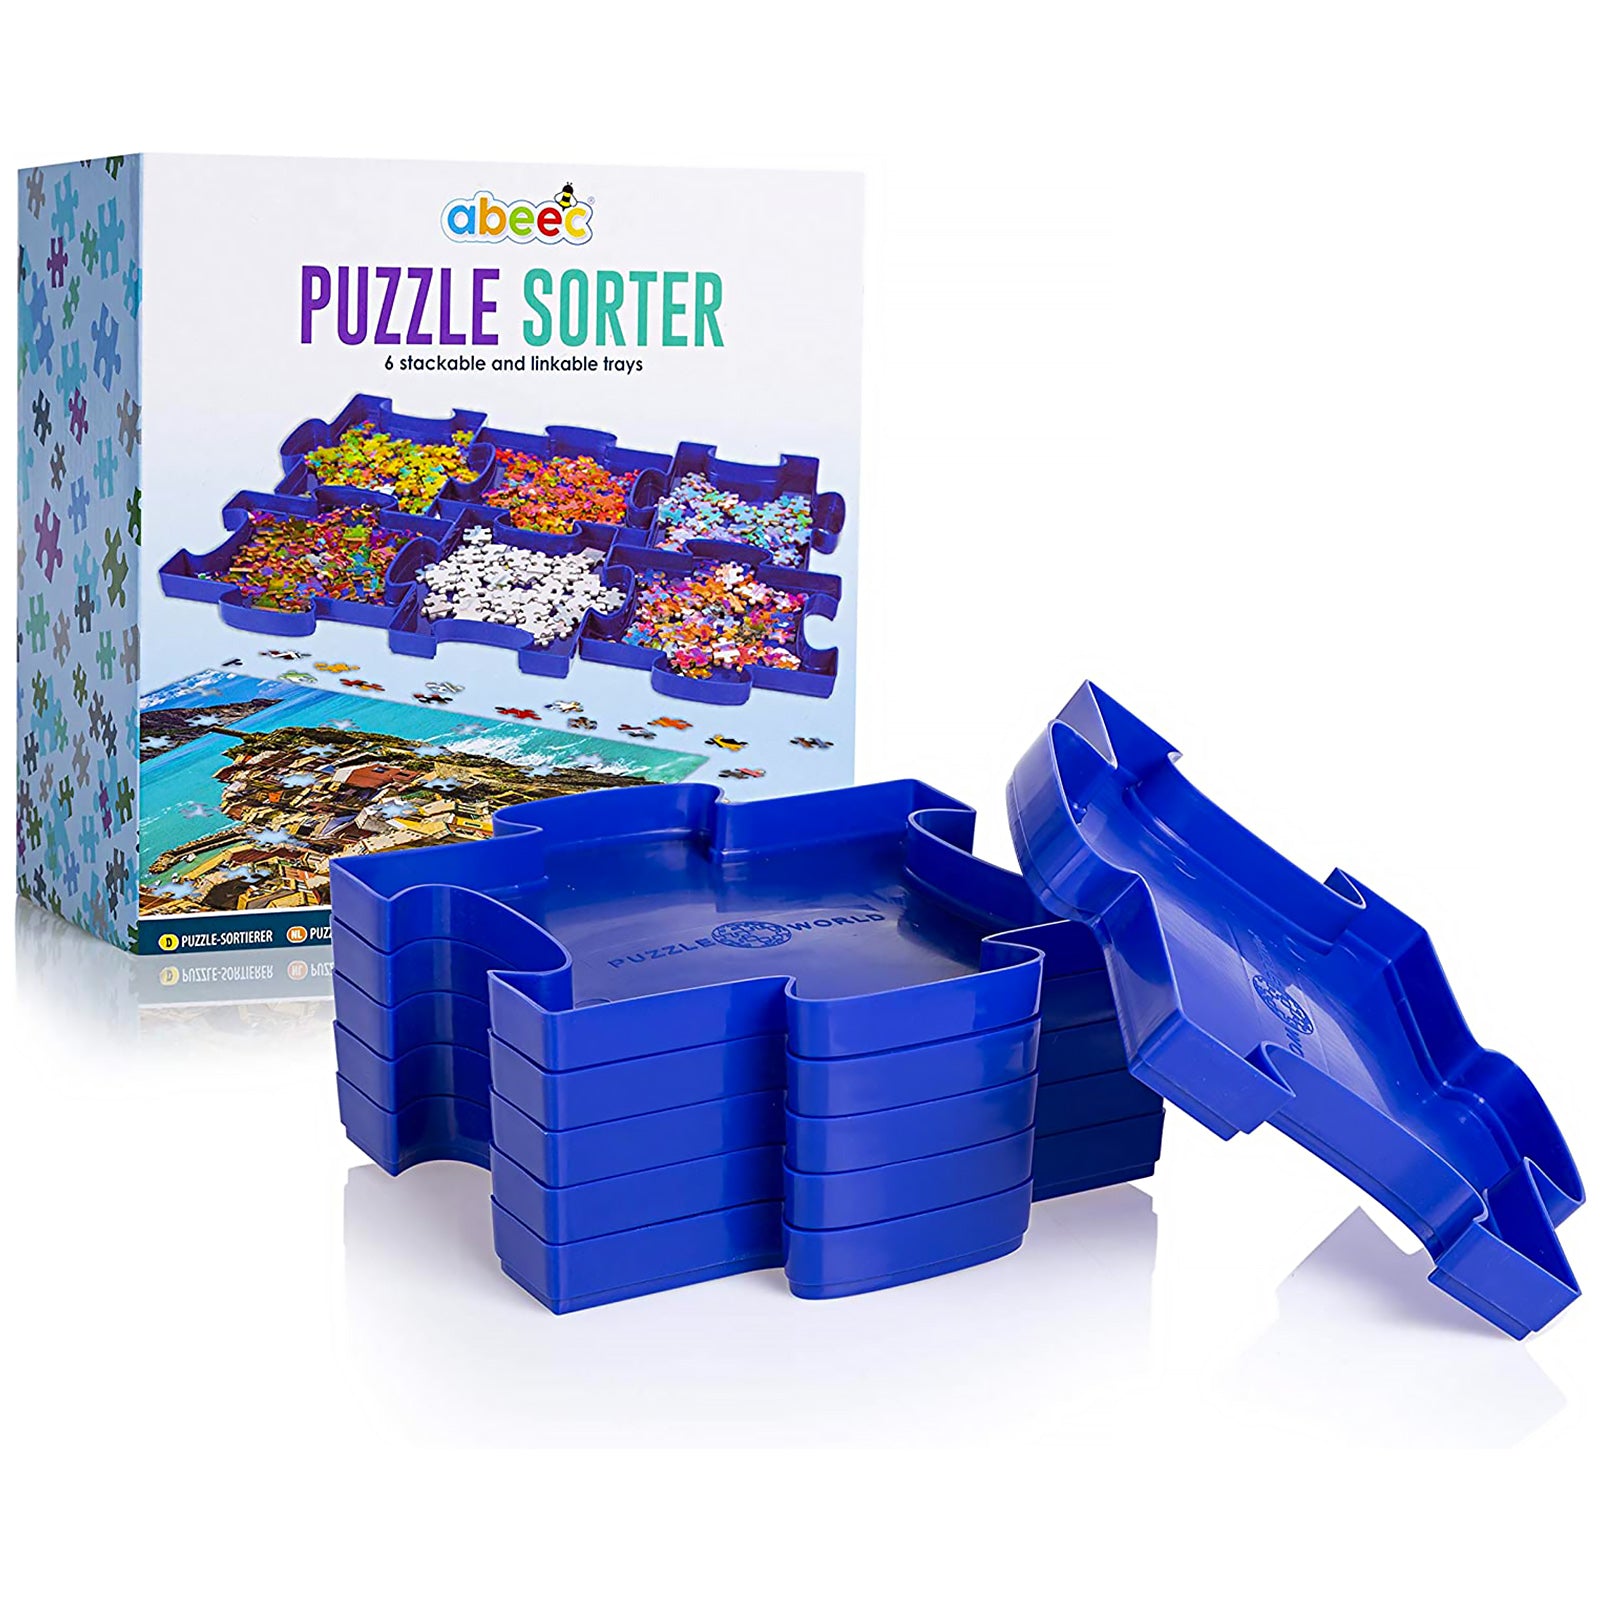 The ideal accessory for all puzzlers - jigsaw sorting trays. An easy way to keep track of where you are up to with your puzzle progress.